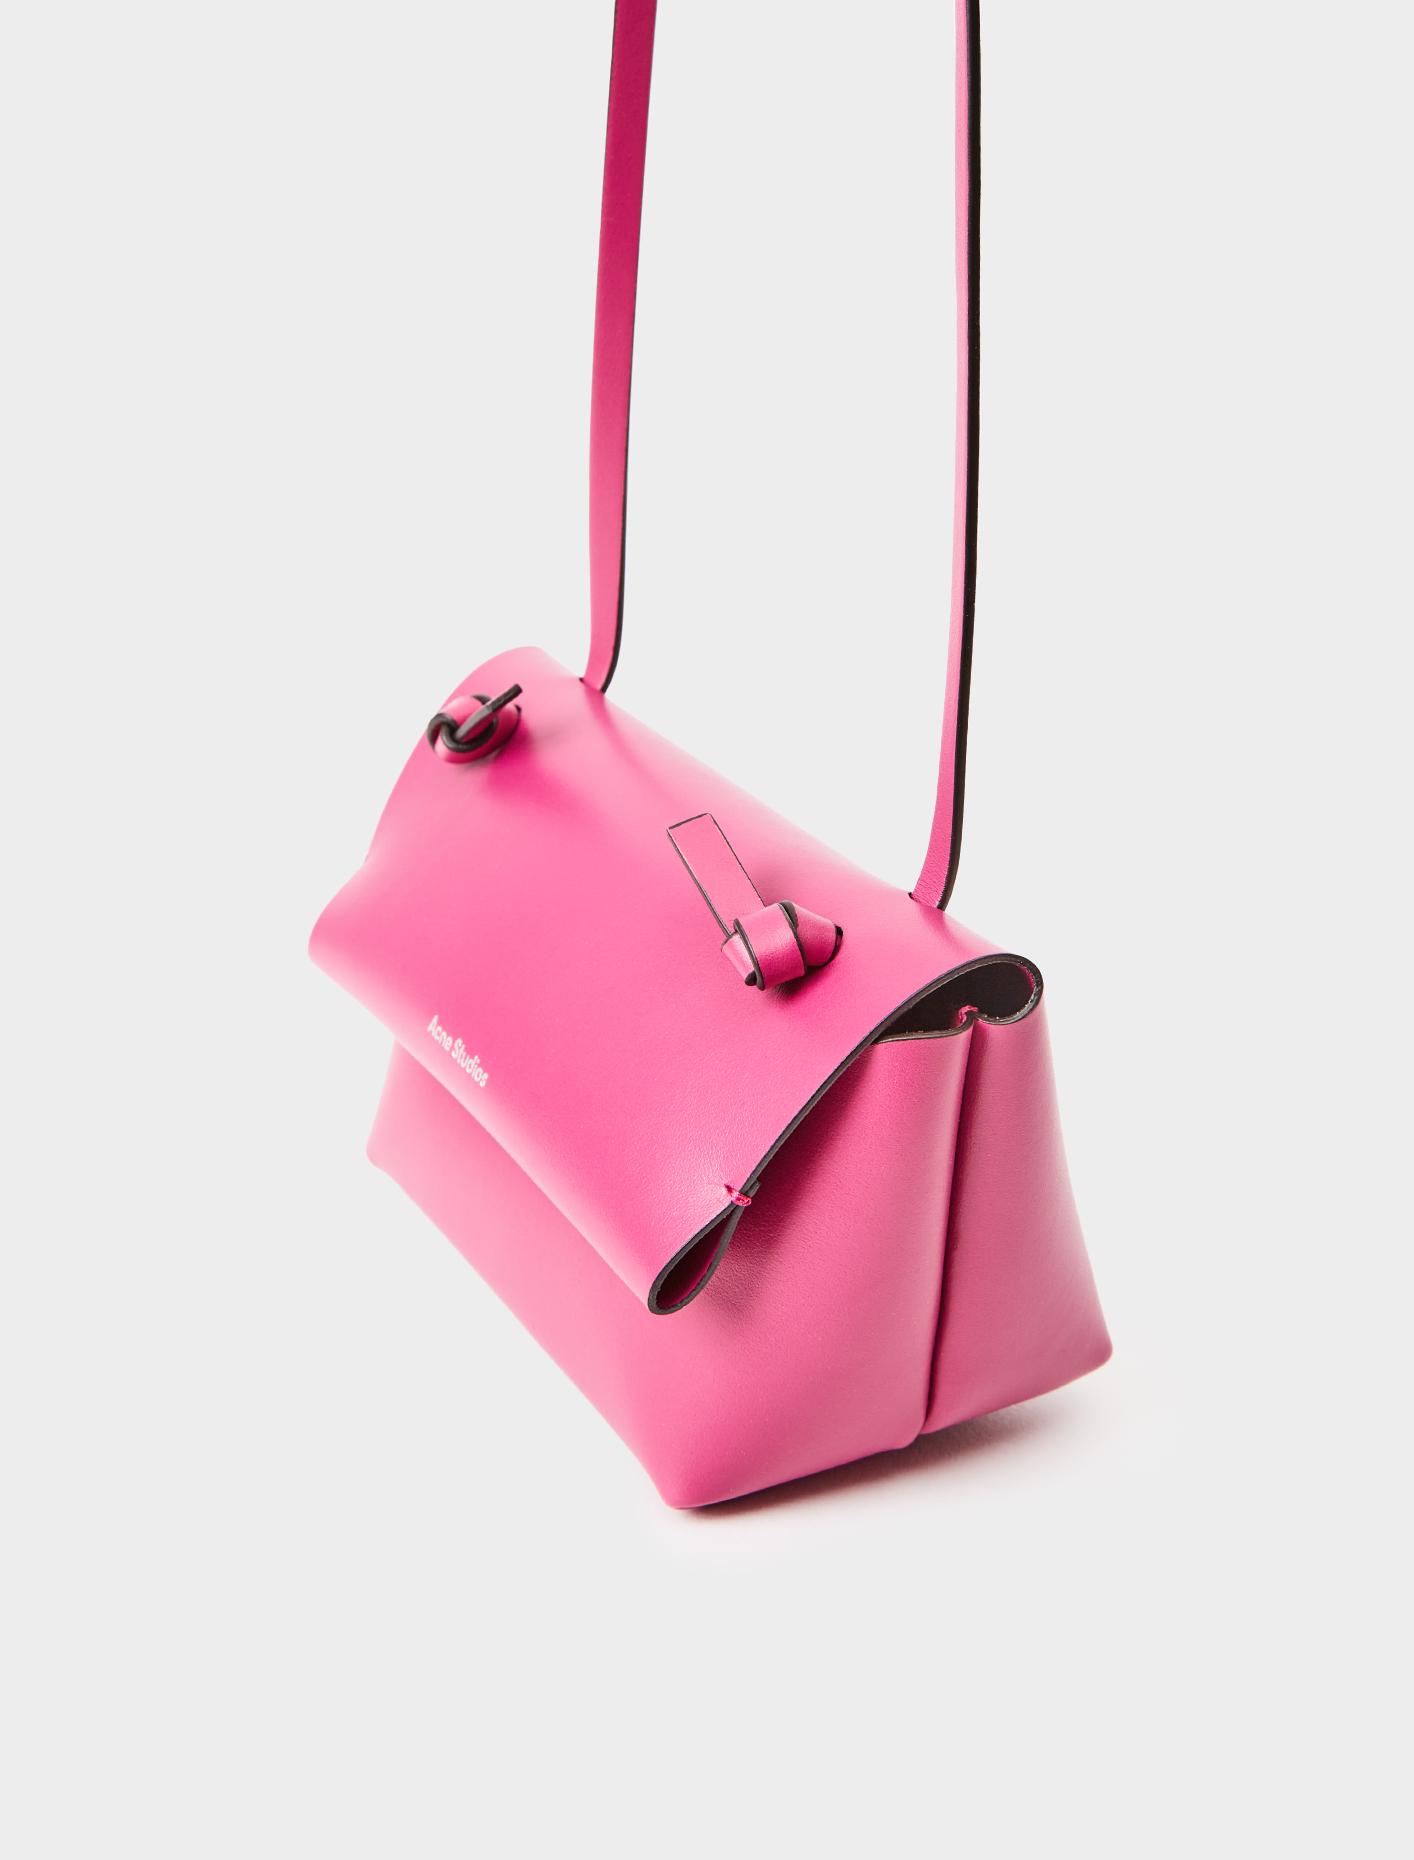 Acne Studios Knotted Strap Purse in Fuchsia Pink | Voo Store Berlin ...